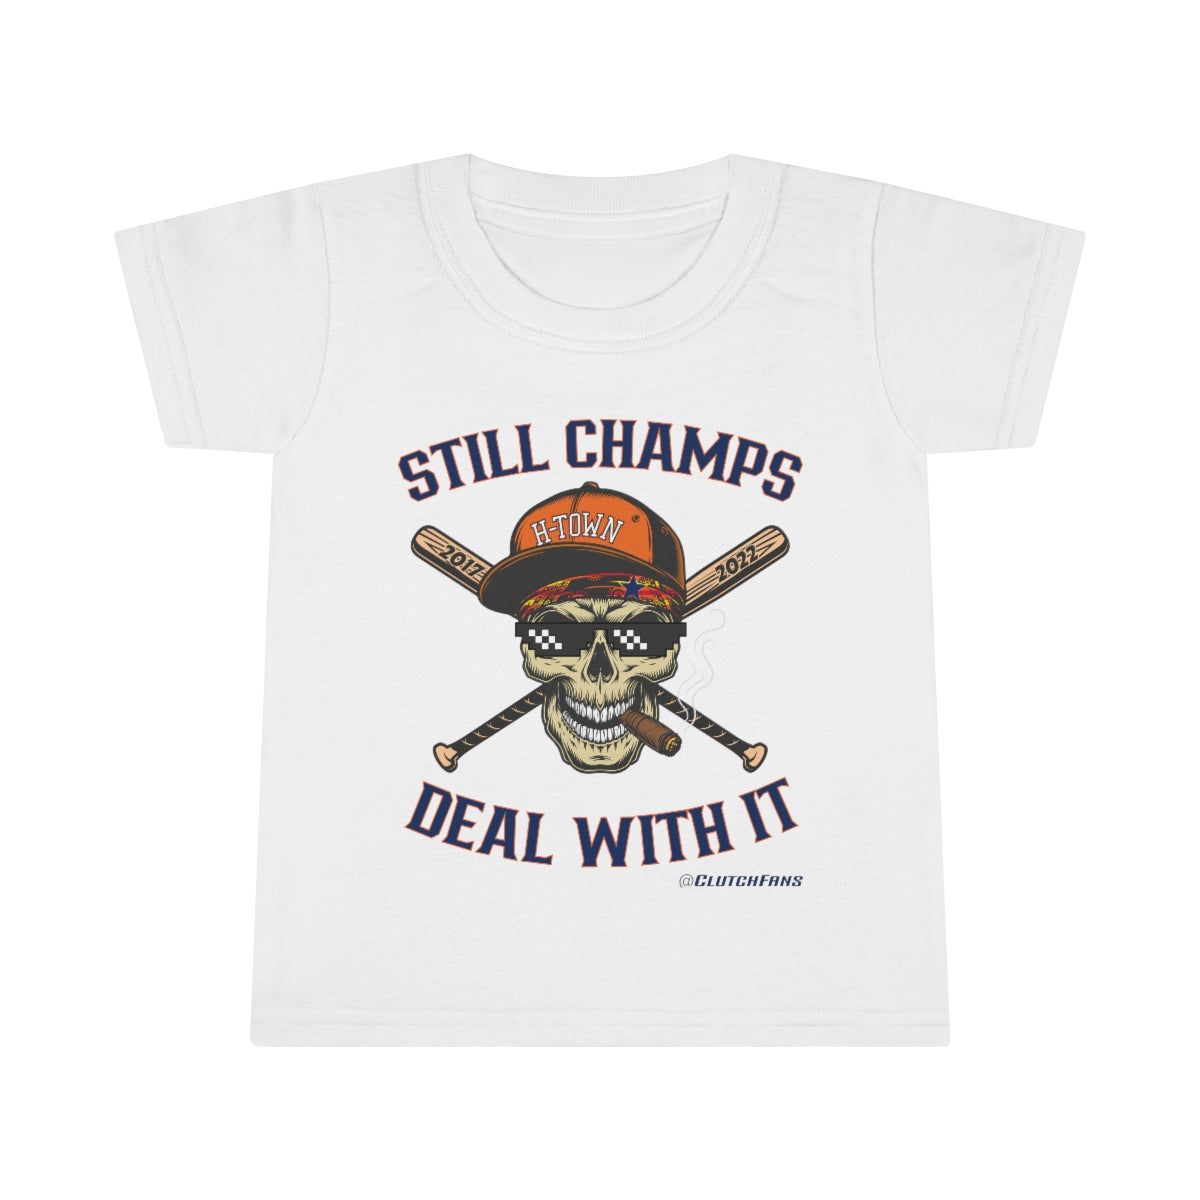 STILL CHAMPS: Deal With It! - TODDLER Tee